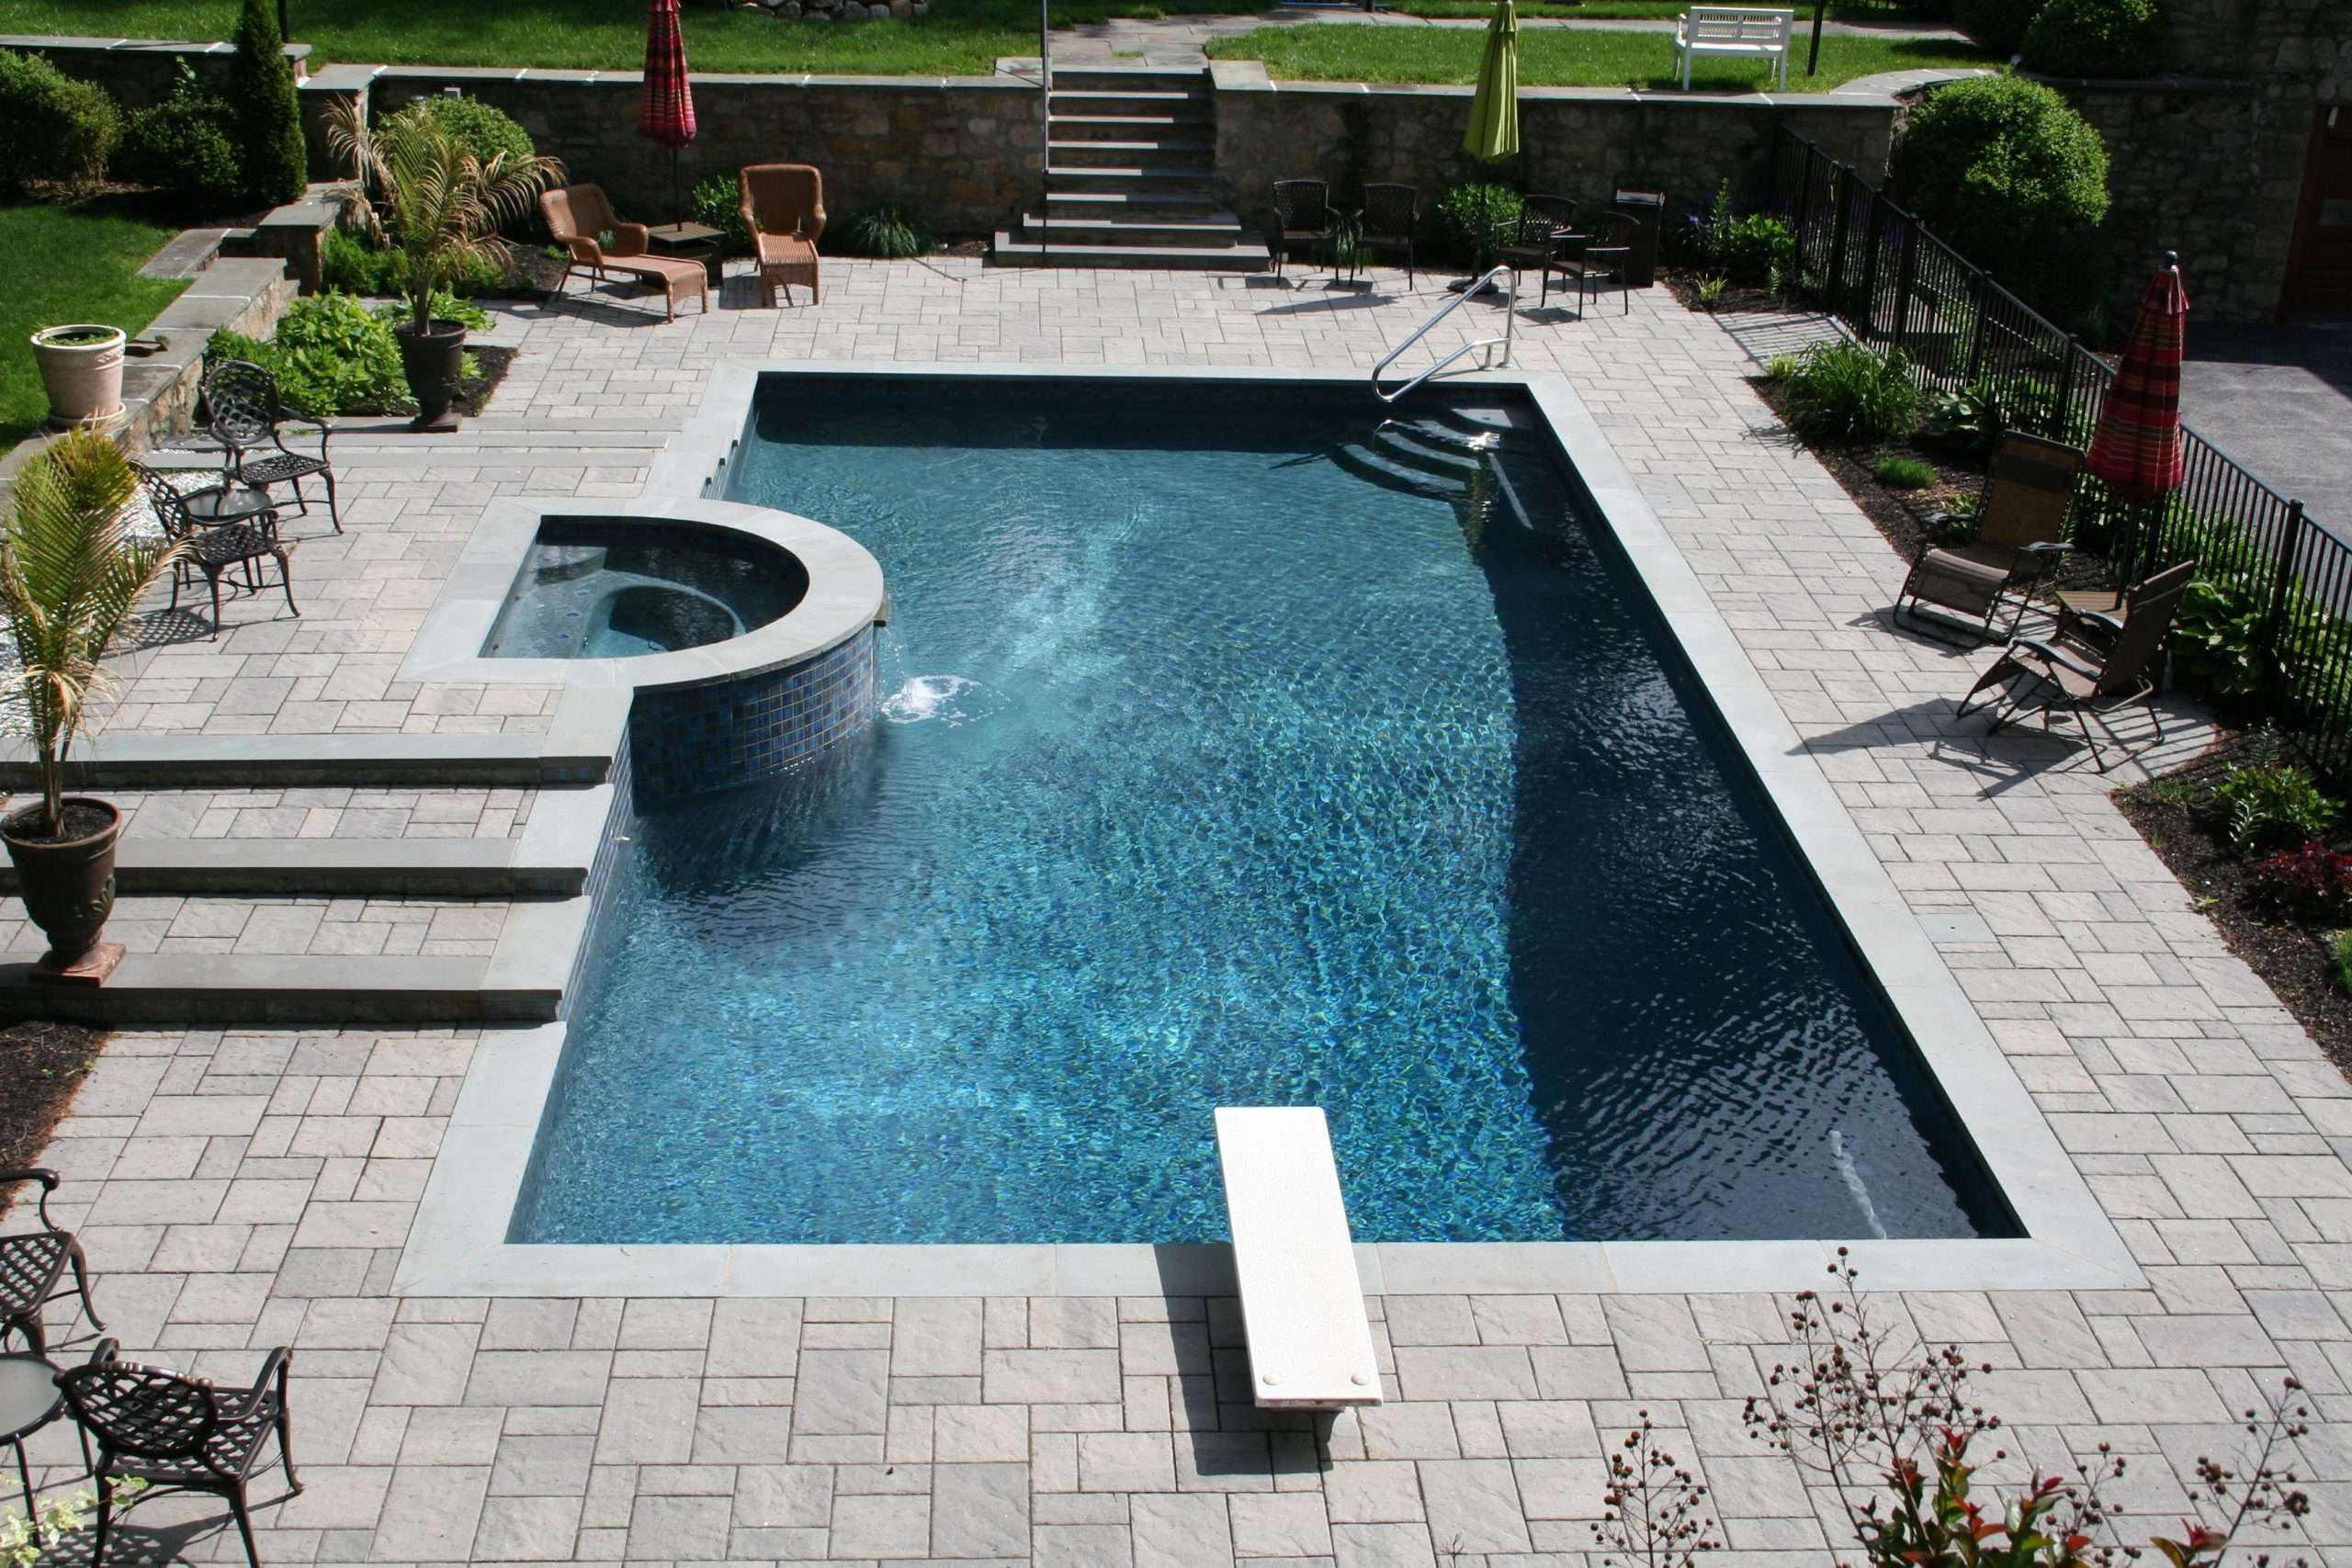 How Much Does It Cost To Build An Inground Pool Yourself ...